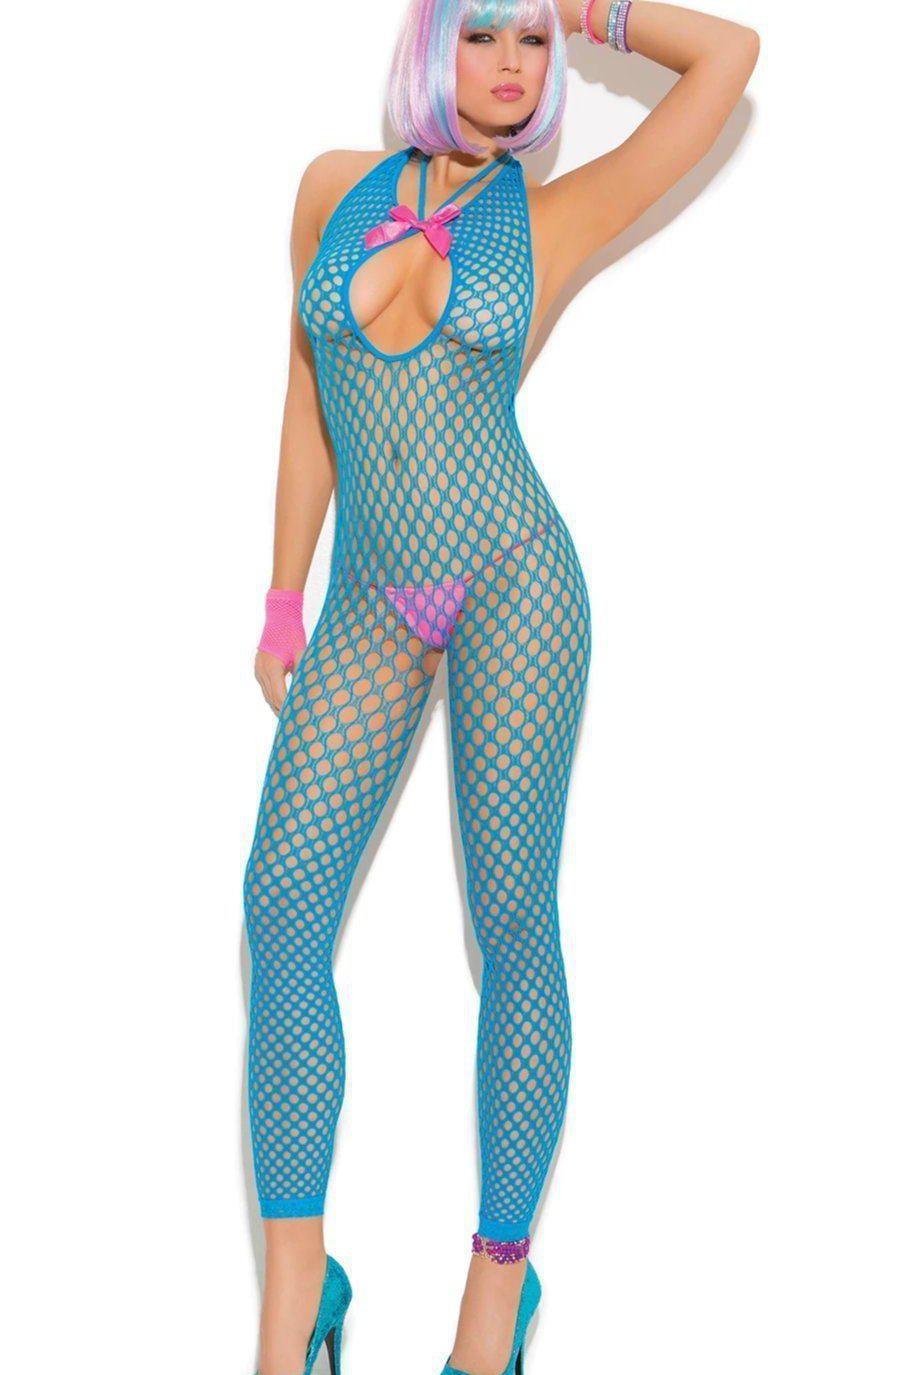 Crochet Footless Bodystocking-Elegant Moments-SEXYSHOES.COM